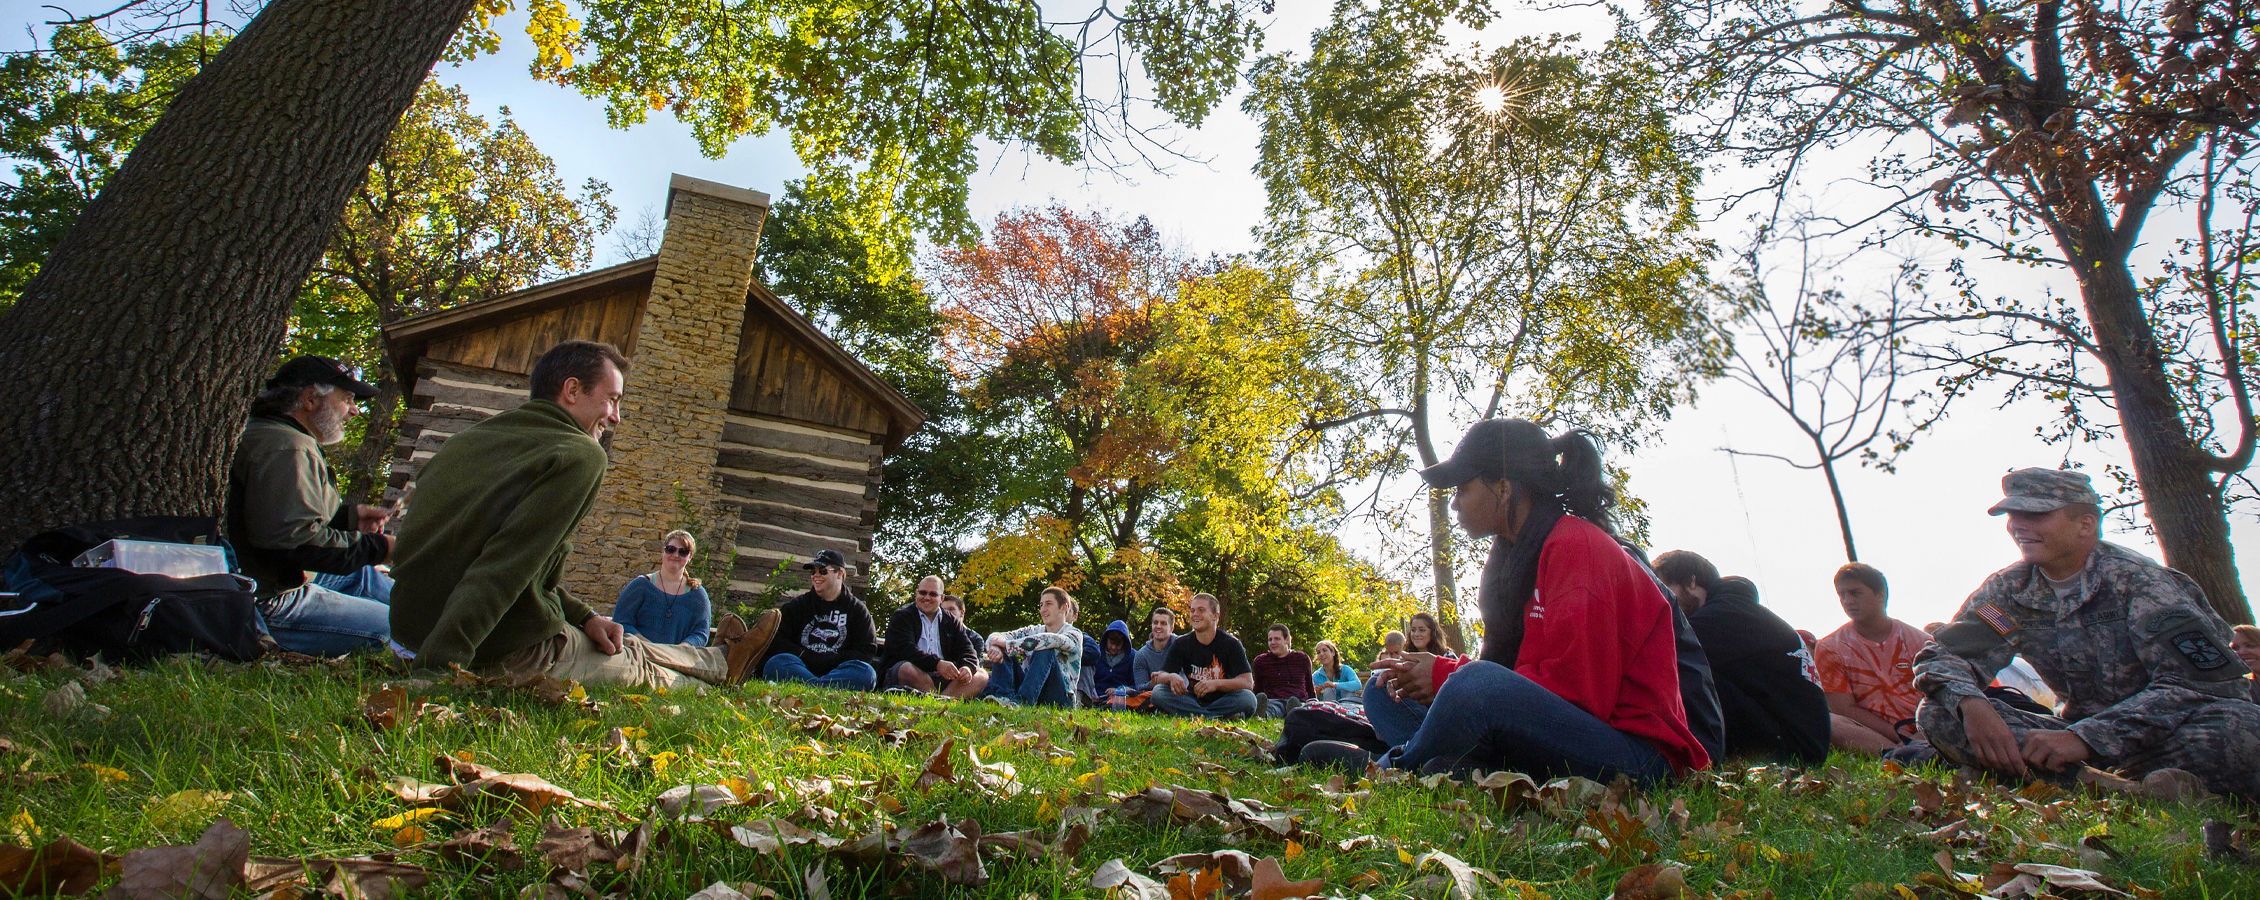  Students sit for a class outdoors with leaves on the ground.